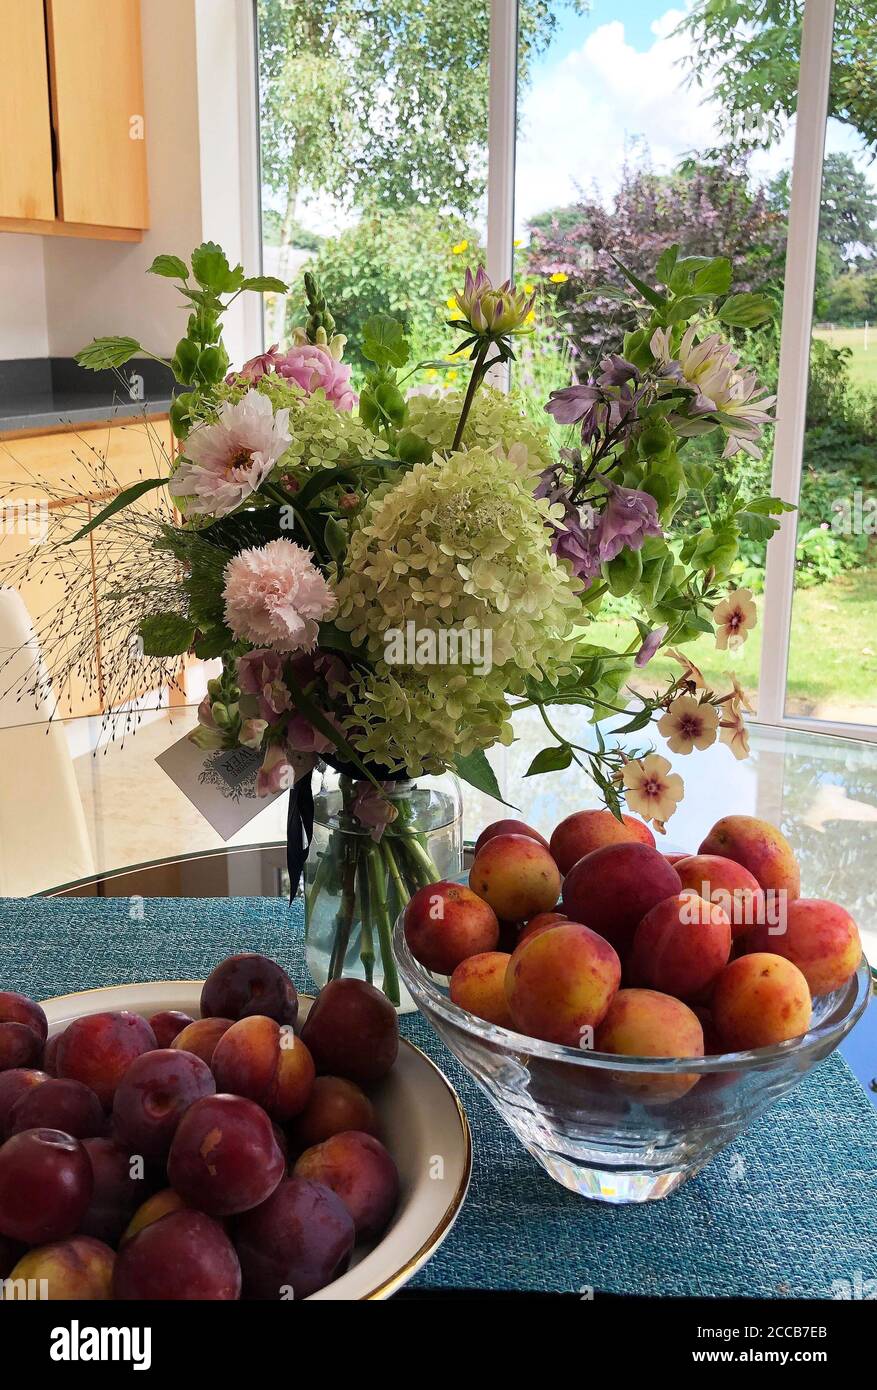 Dark red dessert plums and Victoria plums  in a still life with florist's posy of garden flowers Stock Photo